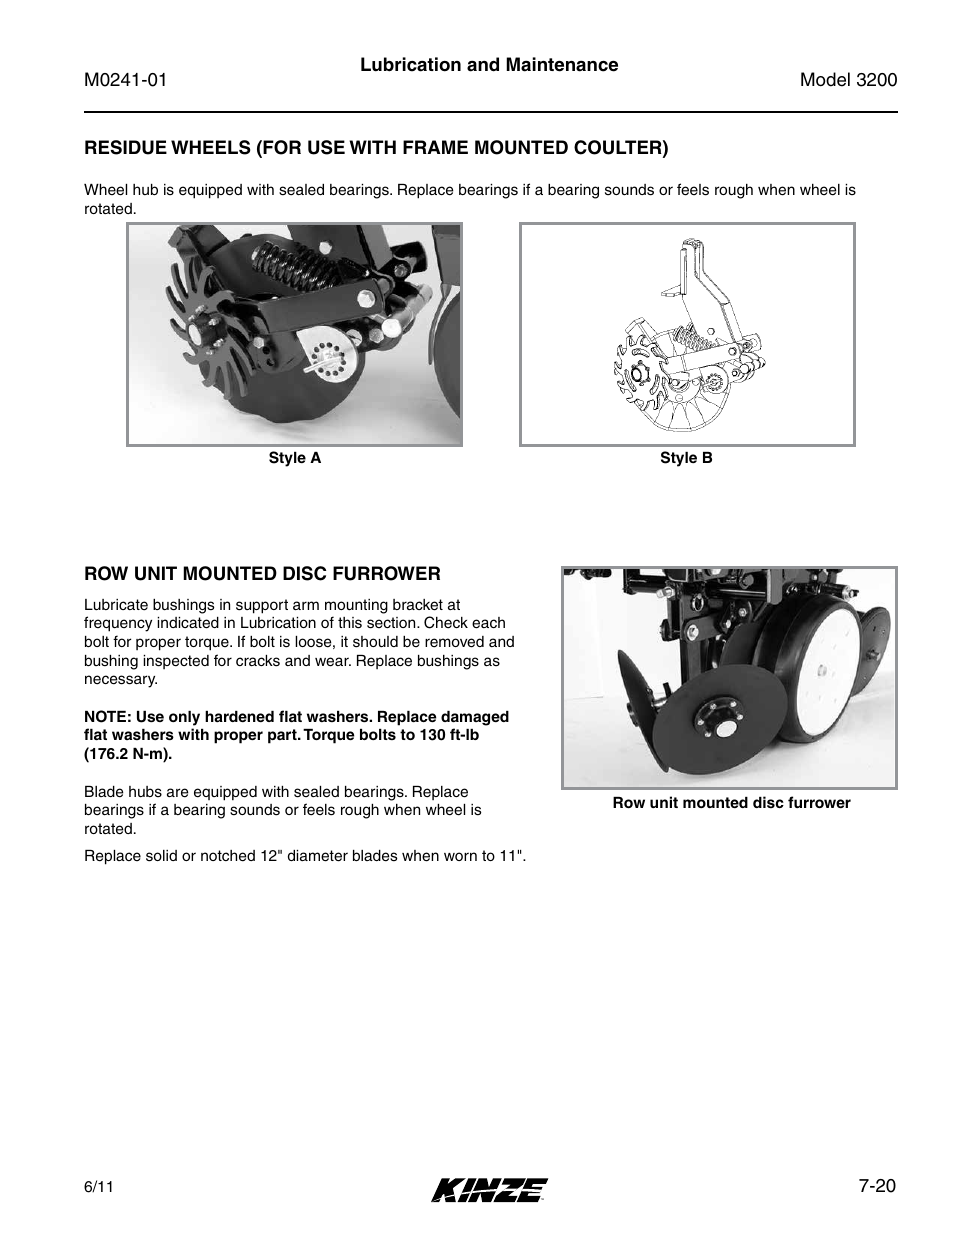 Row unit mounted disc furrower, Row unit mounted disc furrower -20 | Kinze 3200 Wing-Fold Planter Rev. 7/14 User Manual | Page 160 / 192